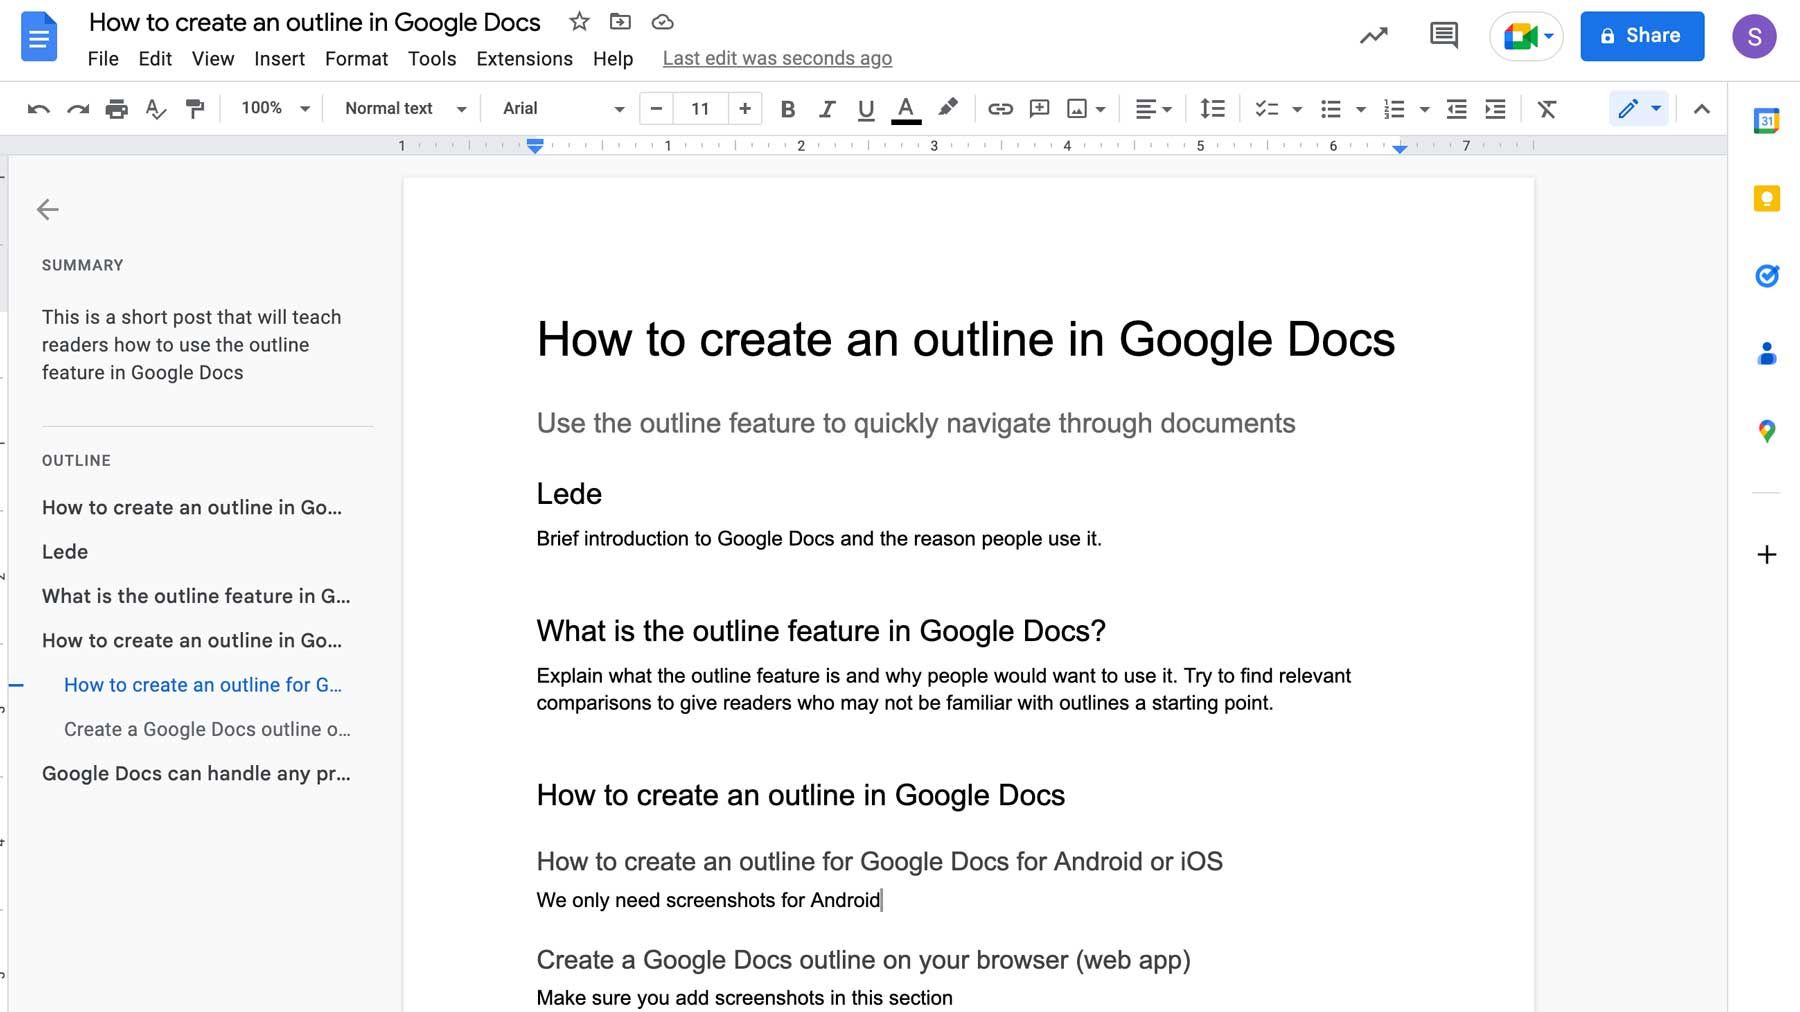 Screenshot of a Google Docs document with an outline